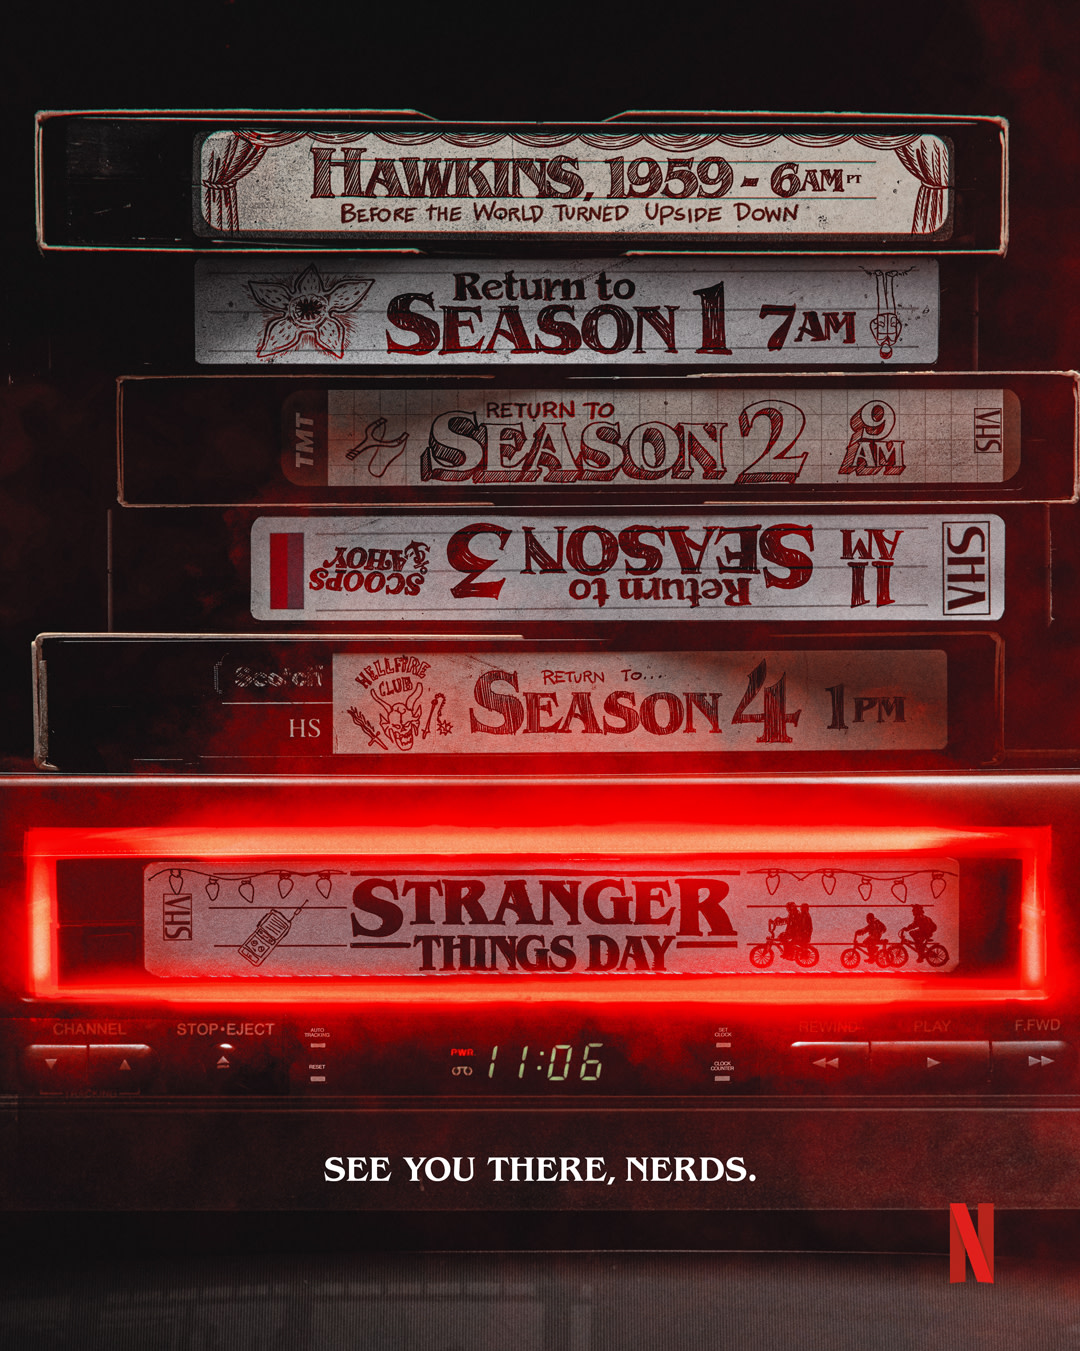 The Strangers 3' is Coming Soon